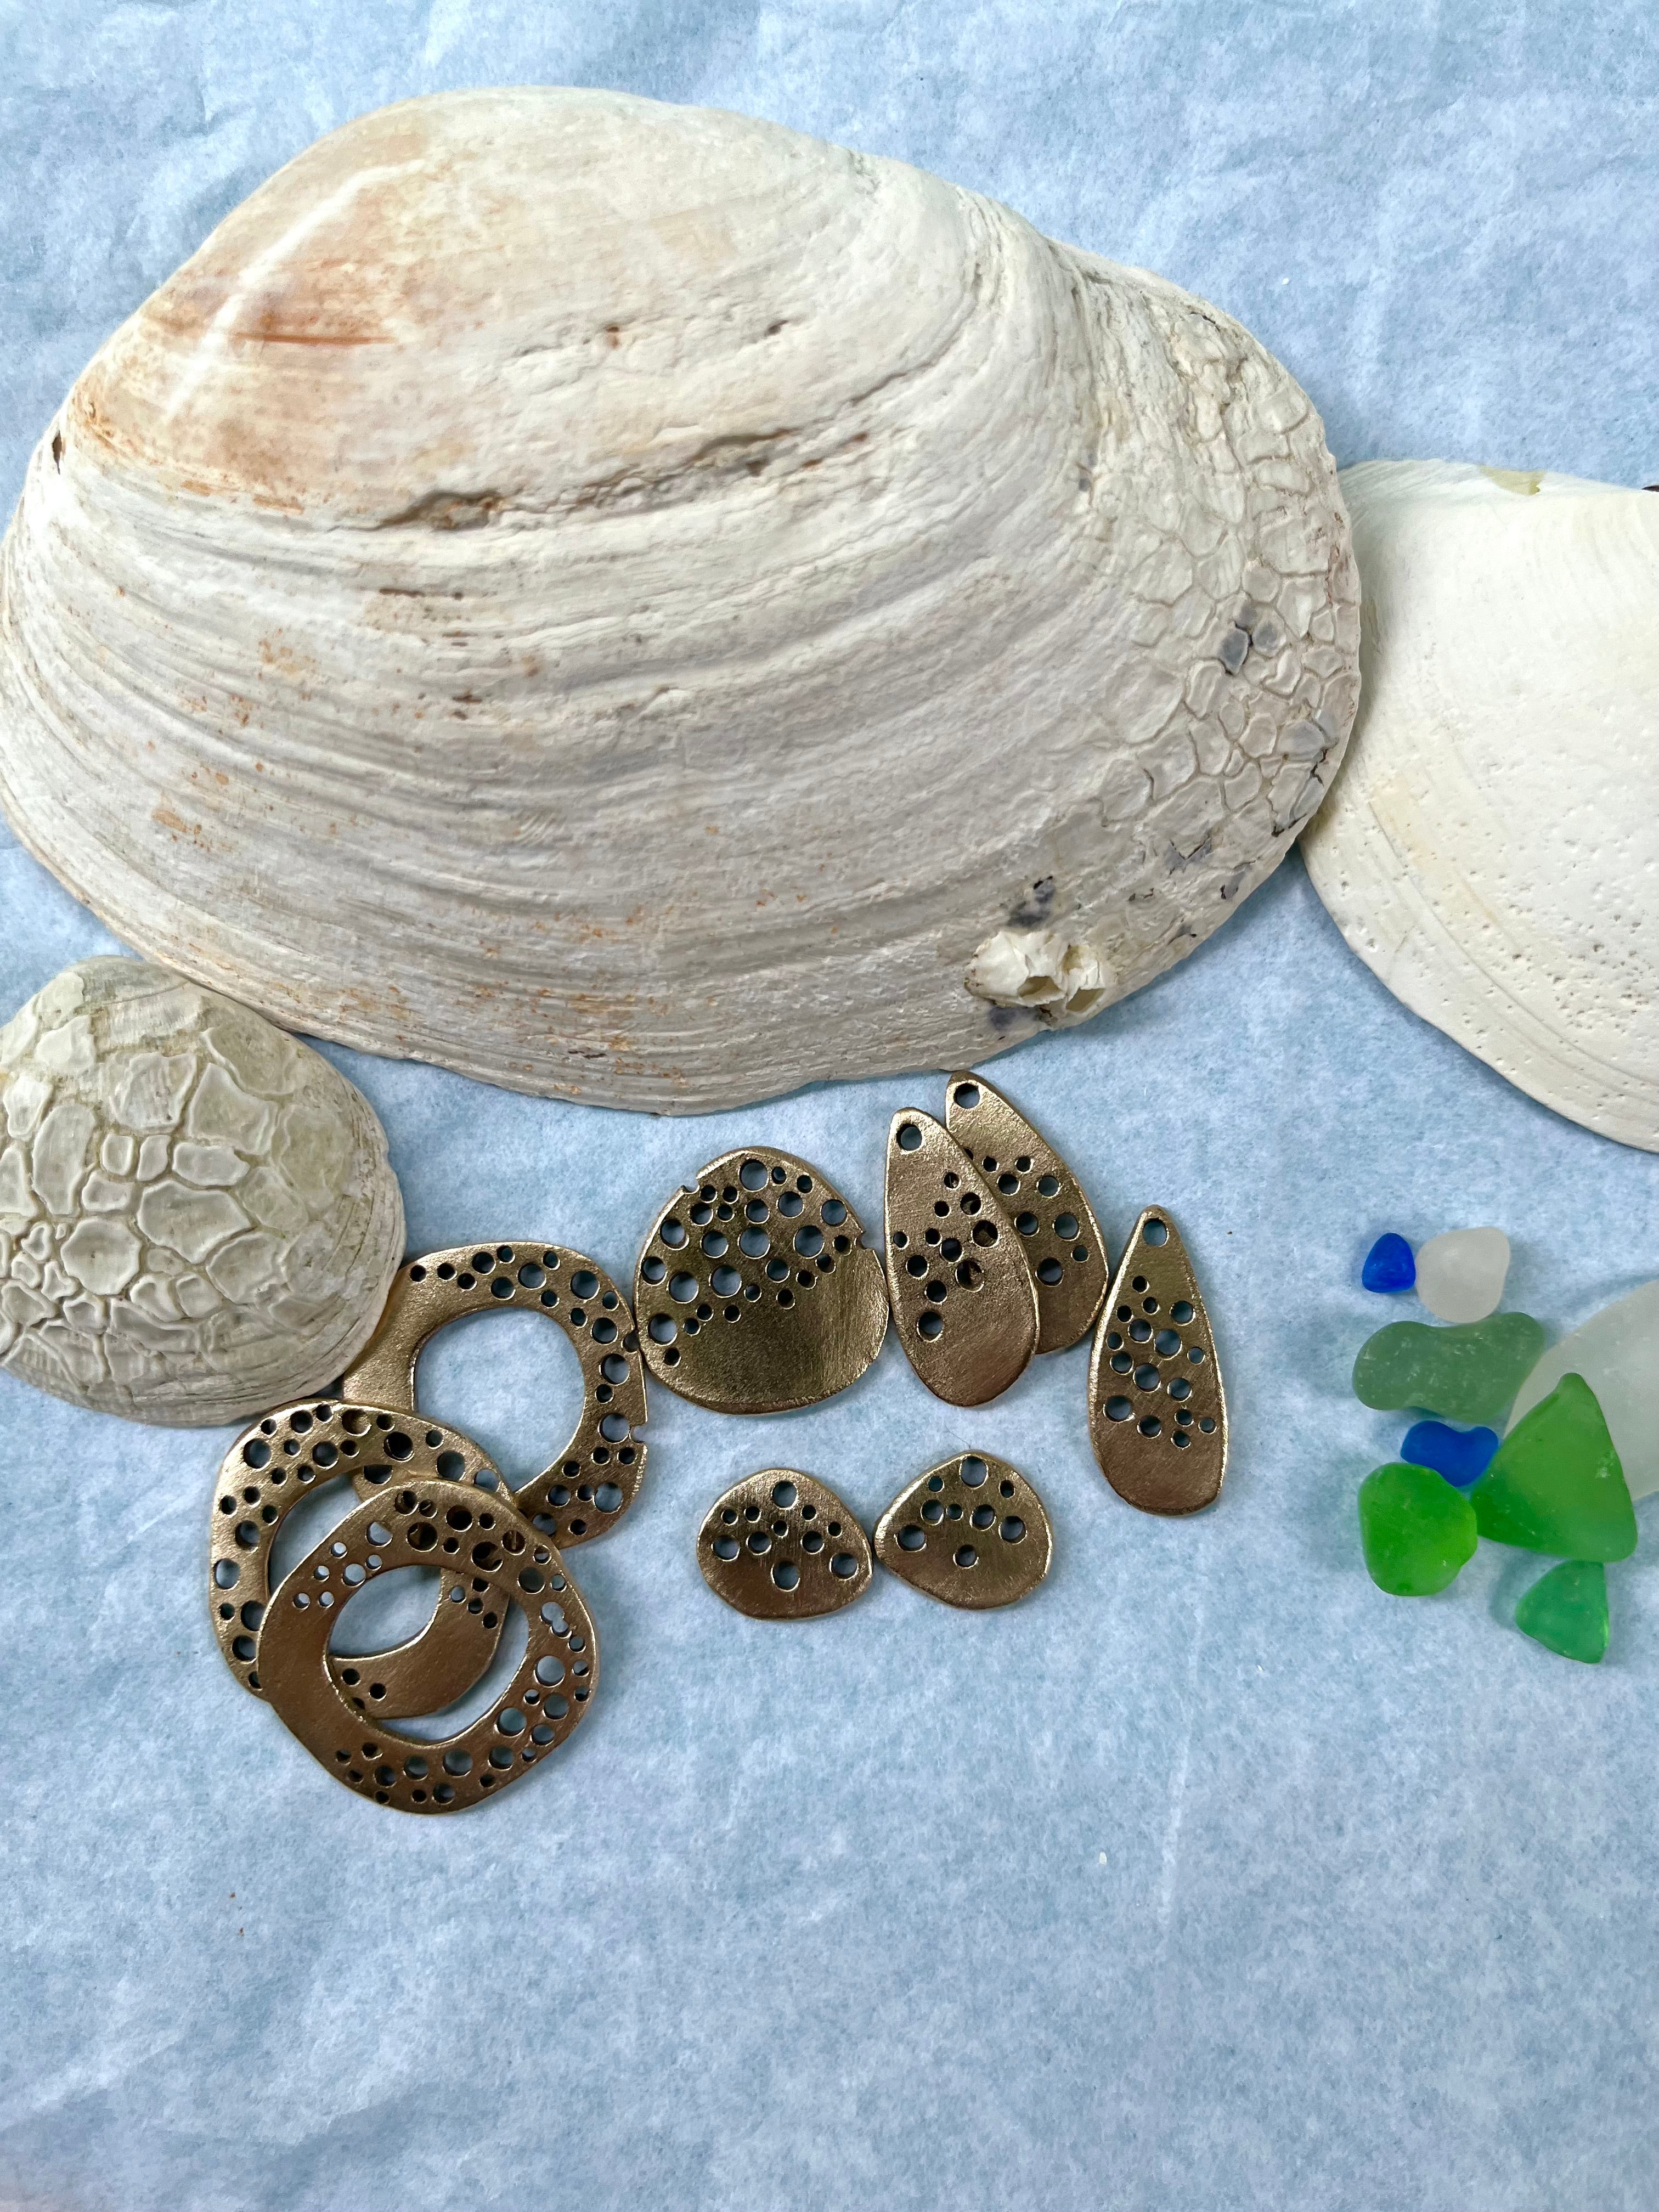 Bronze hand made jewelry charms in front of seashells and beach glass